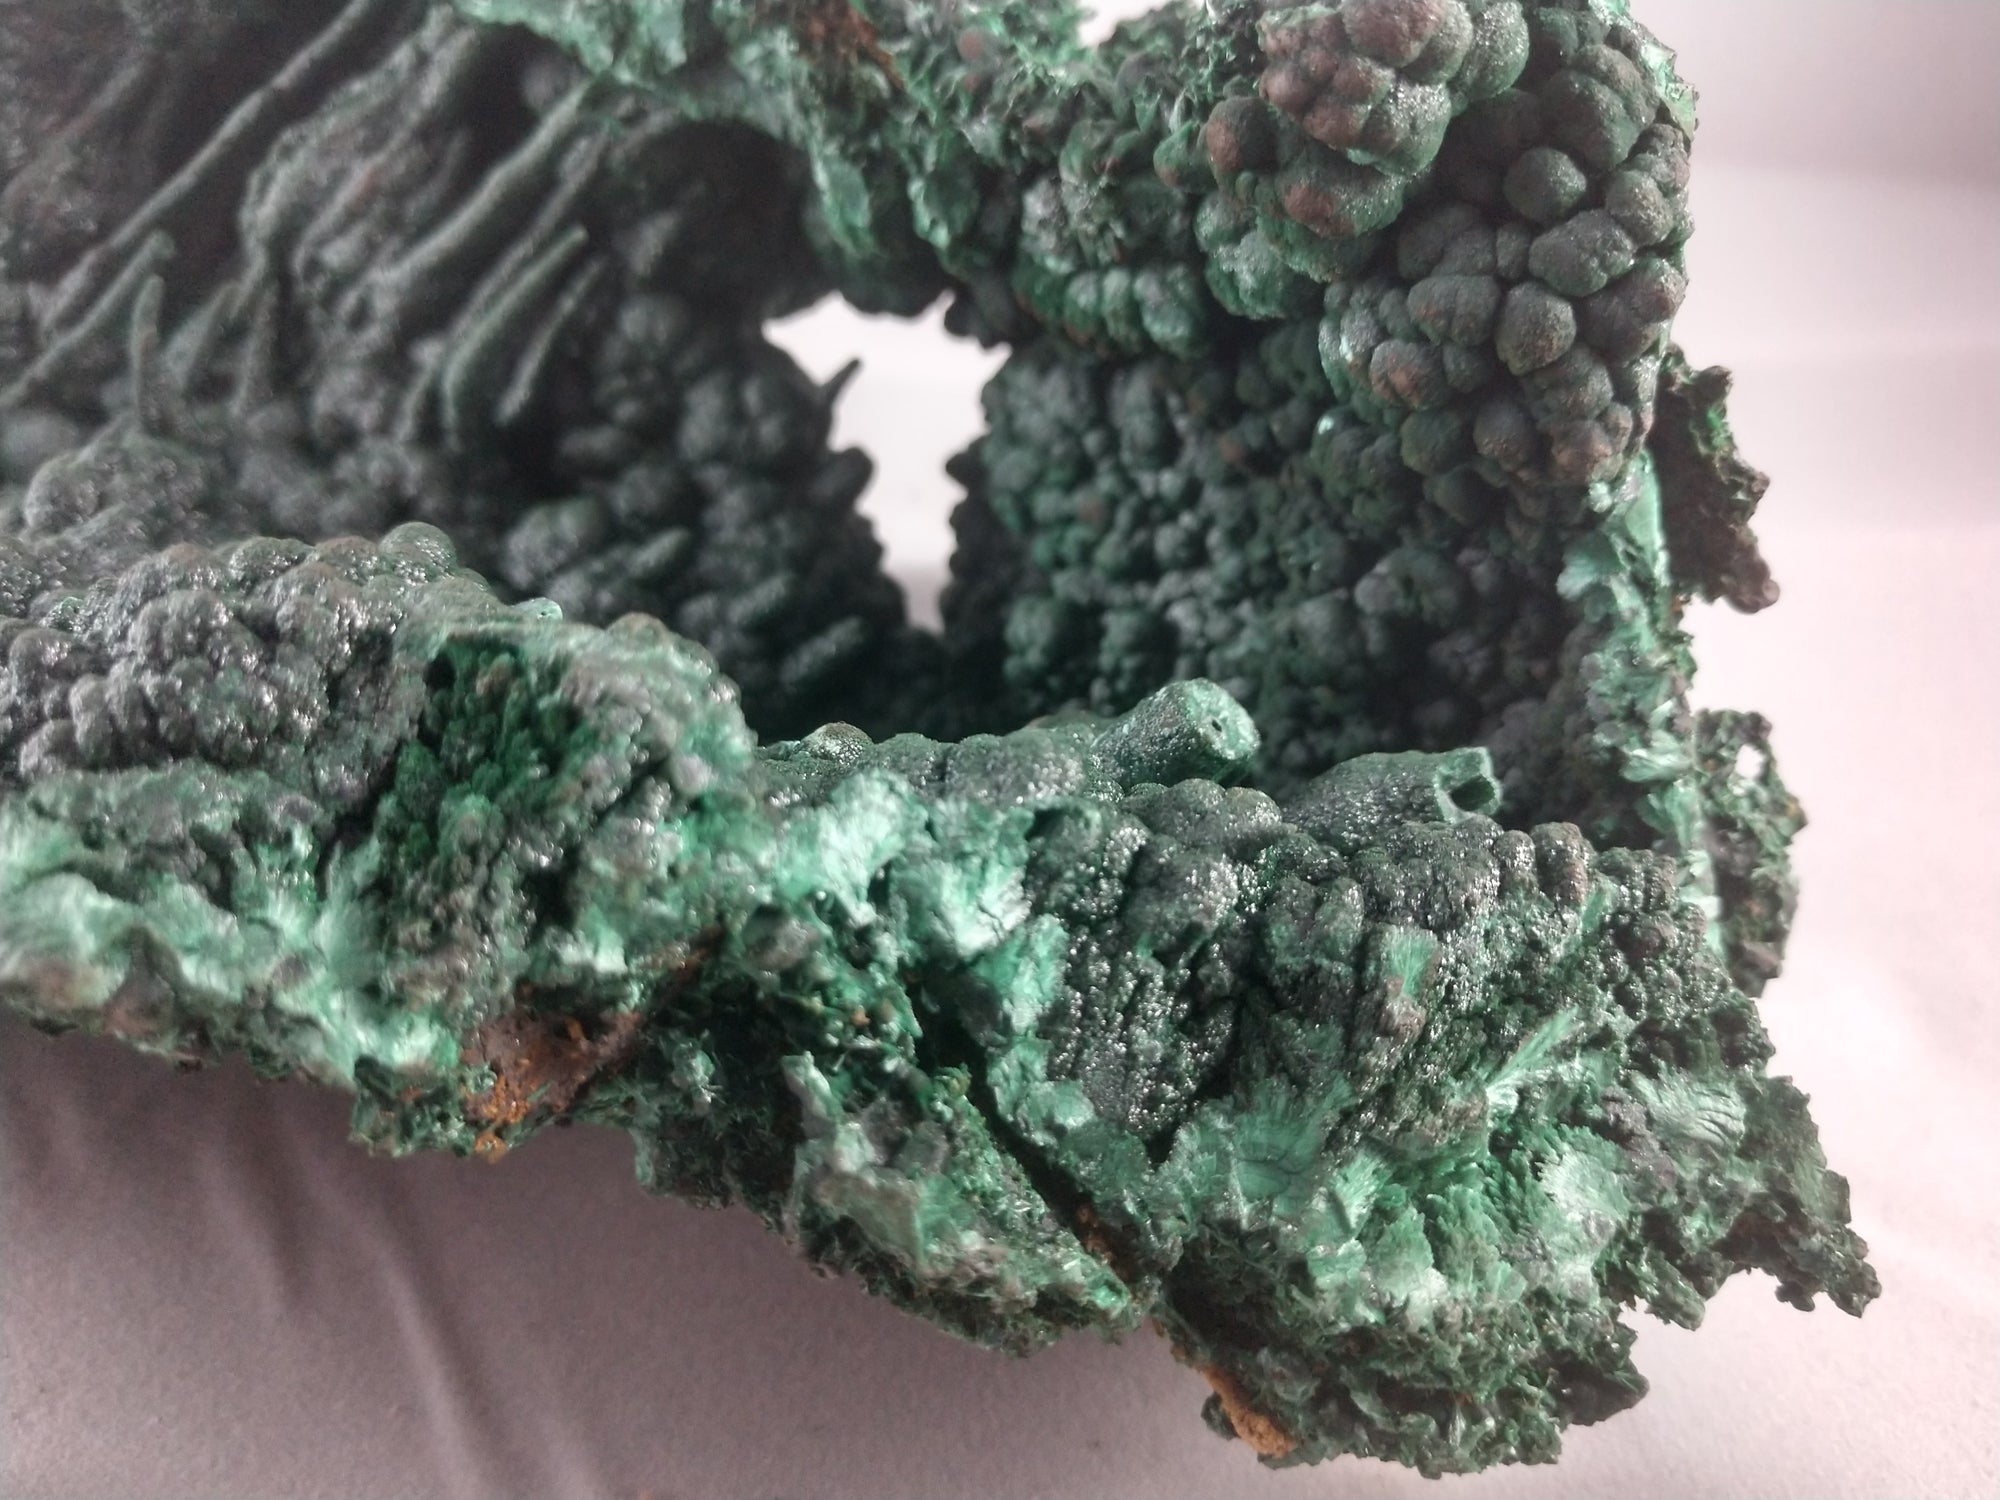 Malachite Stalactite Formation from the Congo